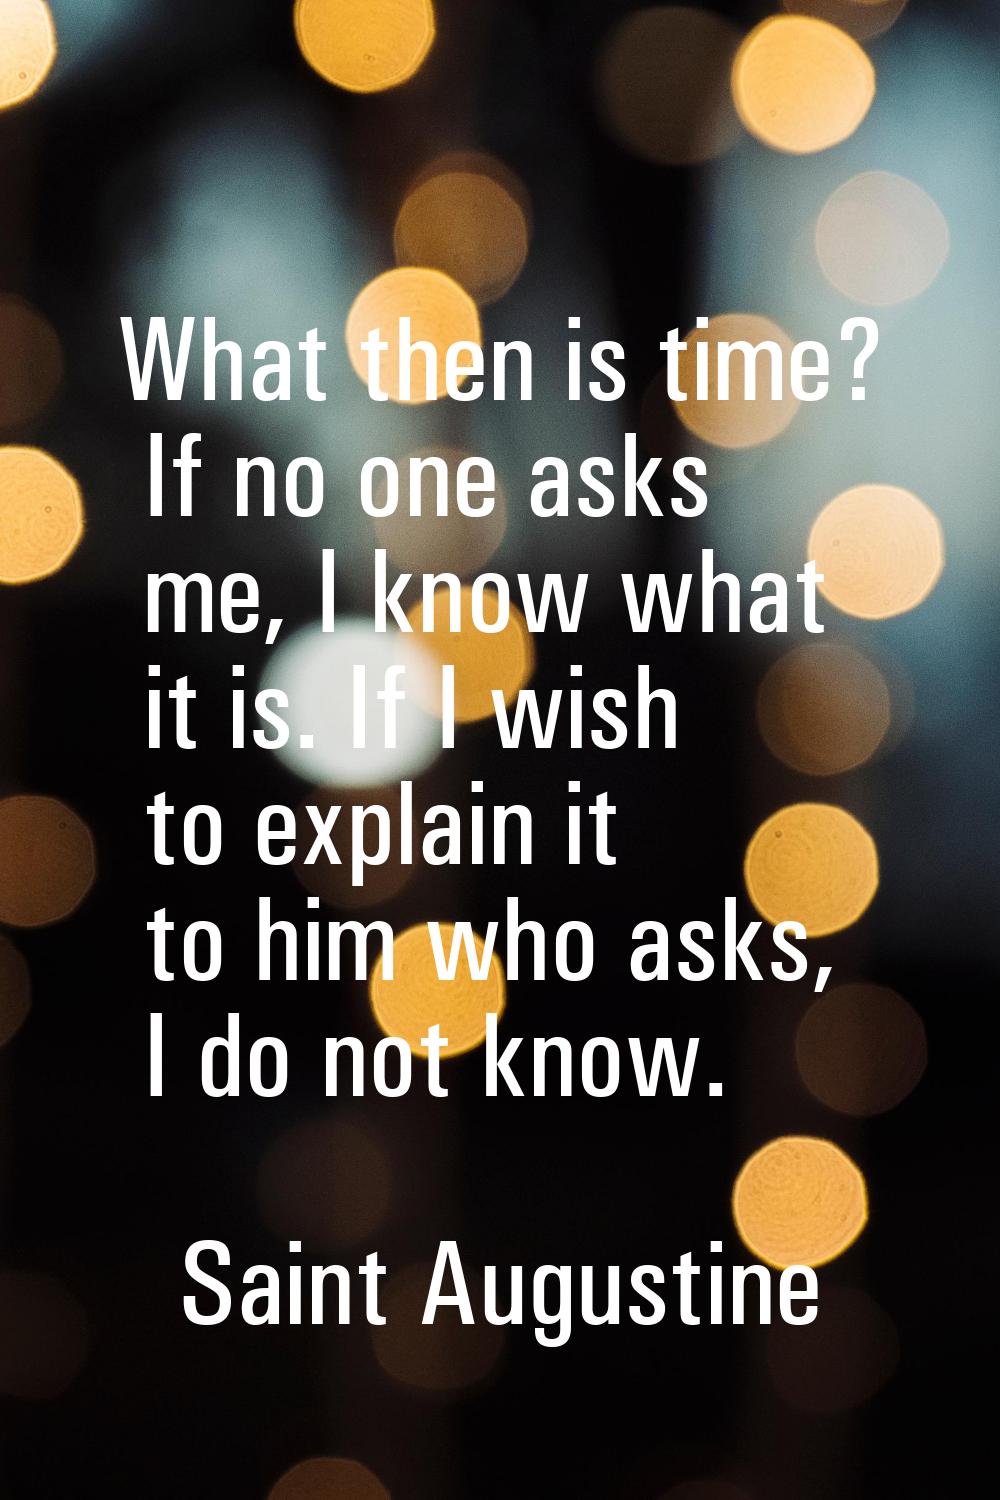 What then is time? If no one asks me, I know what it is. If I wish to explain it to him who asks, I